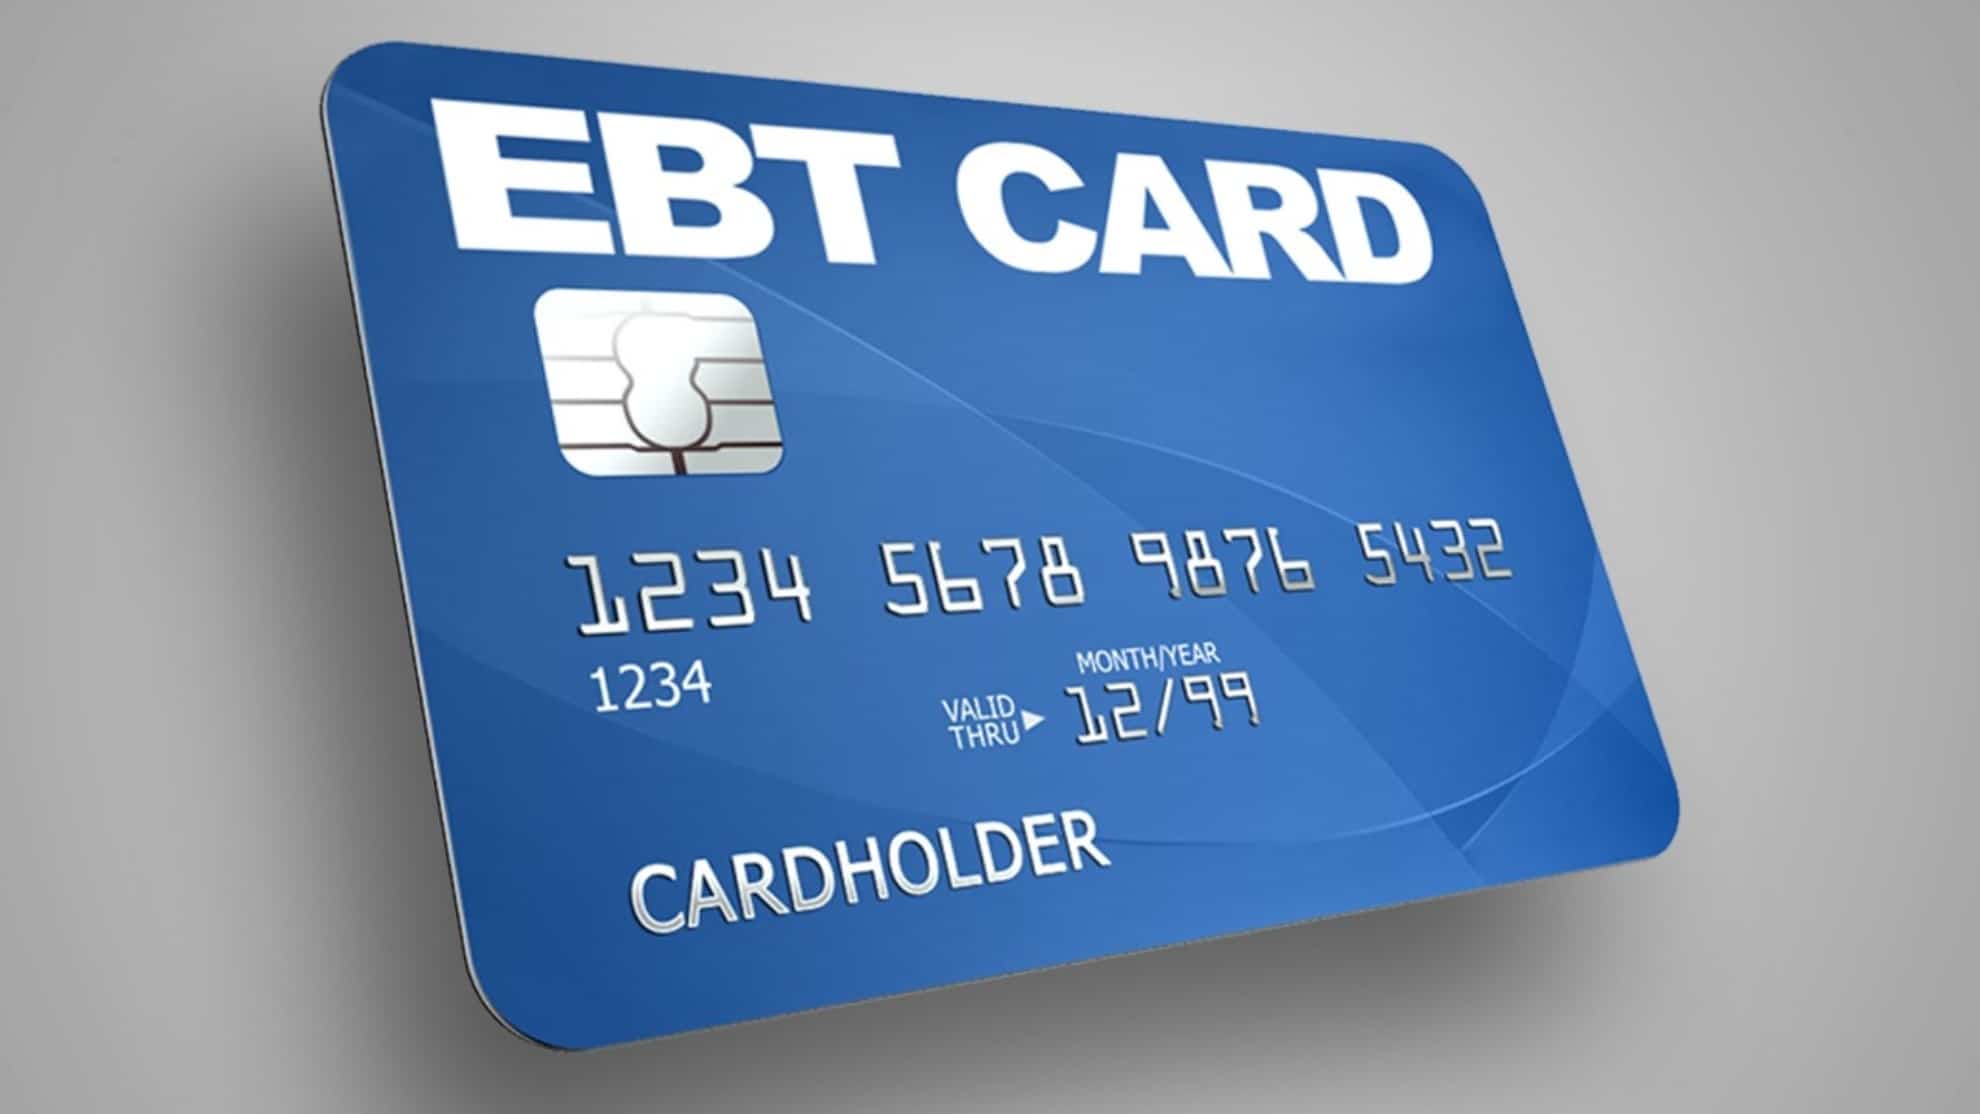 EBT card in the US